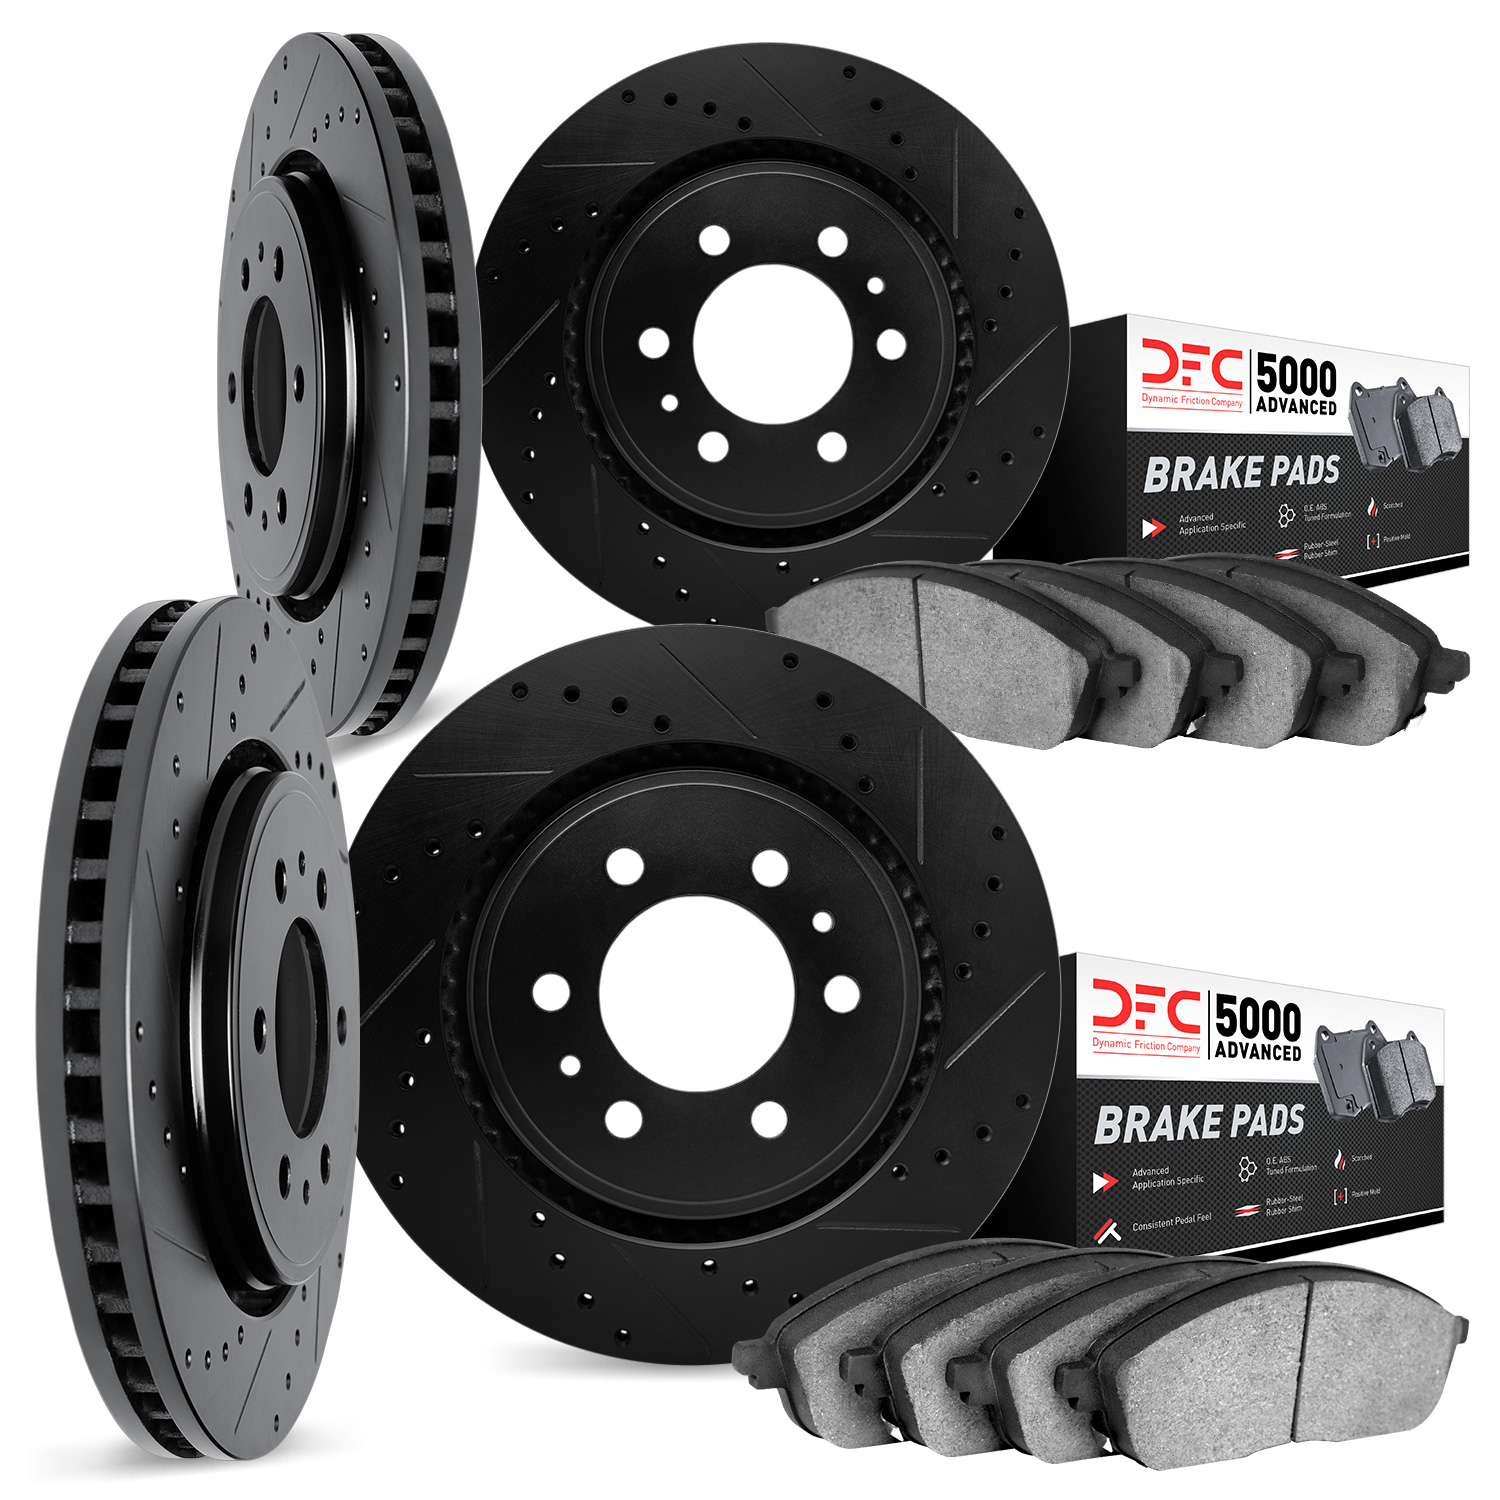 8504-48045 Drilled/Slotted Brake Rotors w/5000 Advanced Brake Pads Kit [Black], 2015-2020 GM, Position: Front and Rear